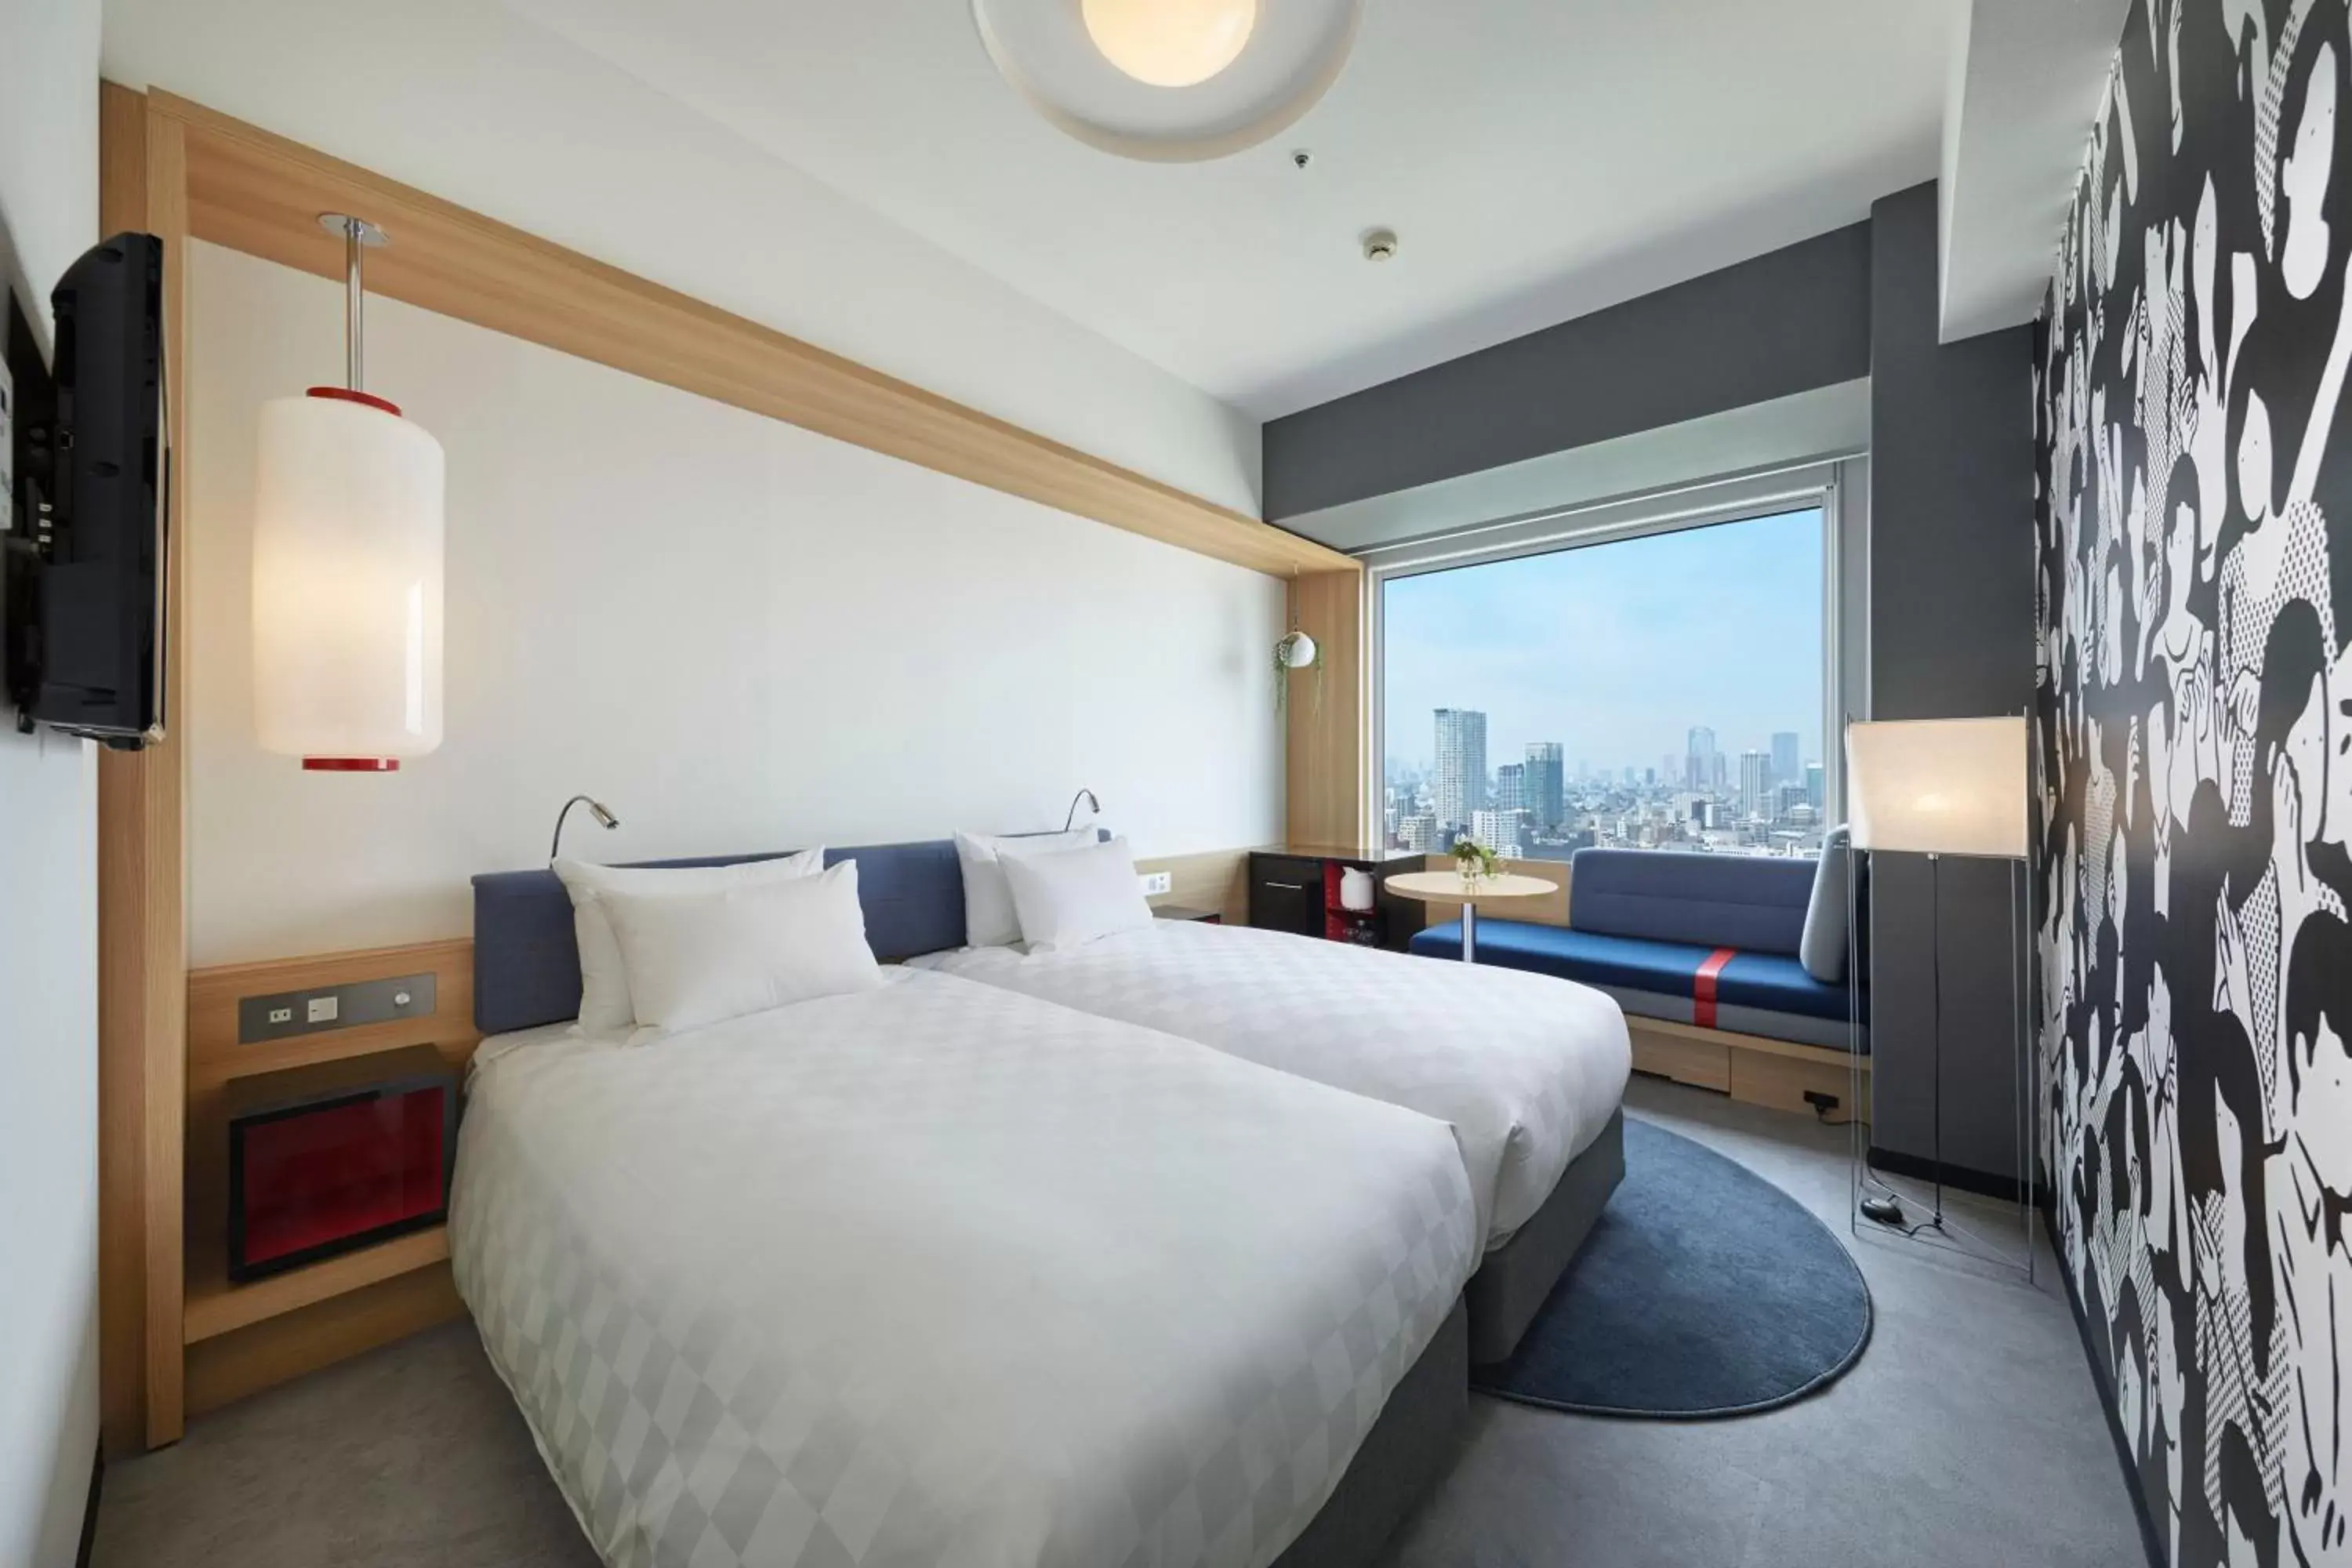 Annex Tower - single occupancy - Millennial Twin Room - Non-Smoking 30th-32nd Floor  in Shinagawa Prince Hotel